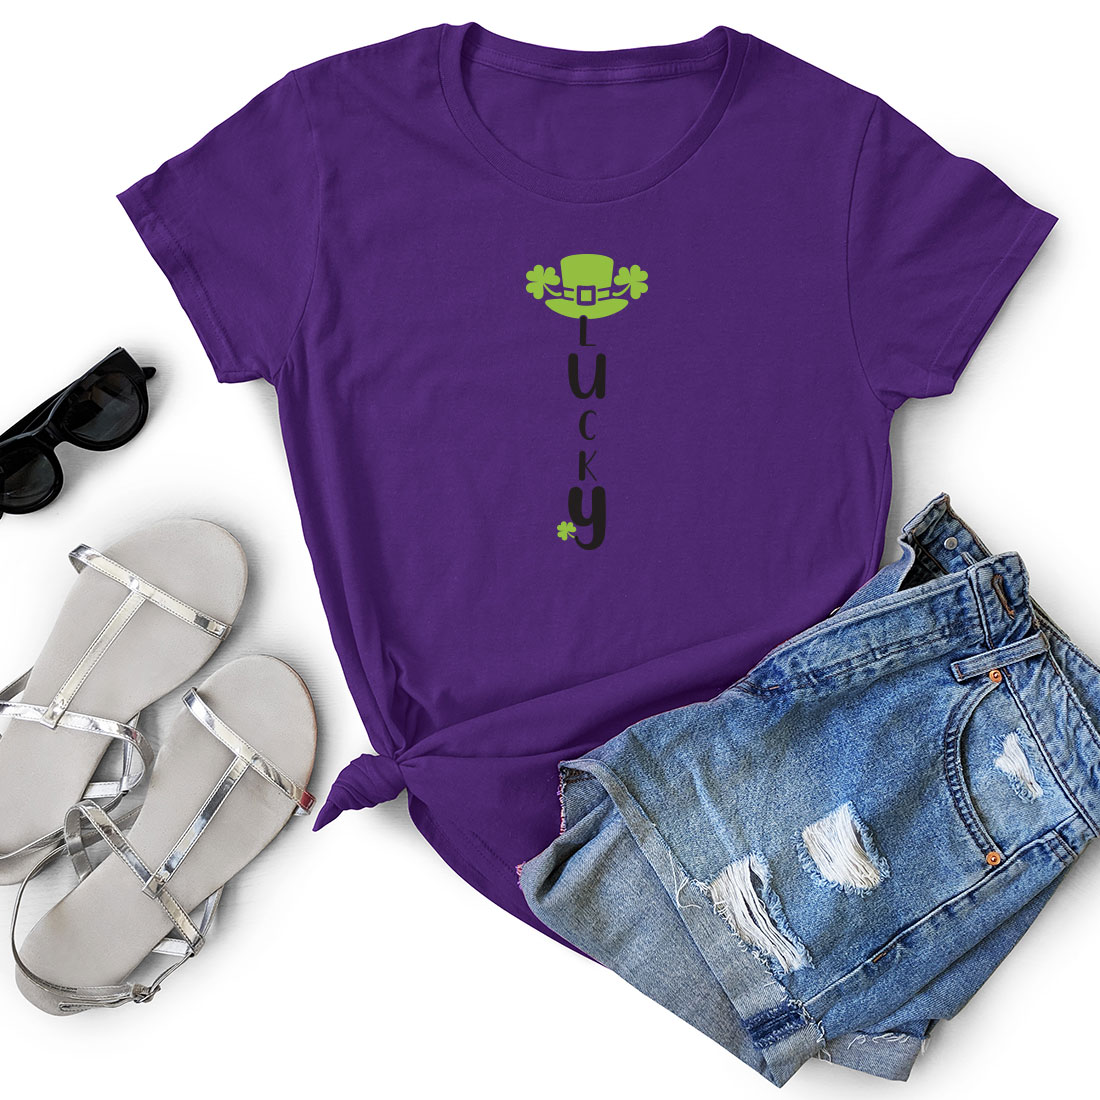 Purple shirt with a green robot on it.